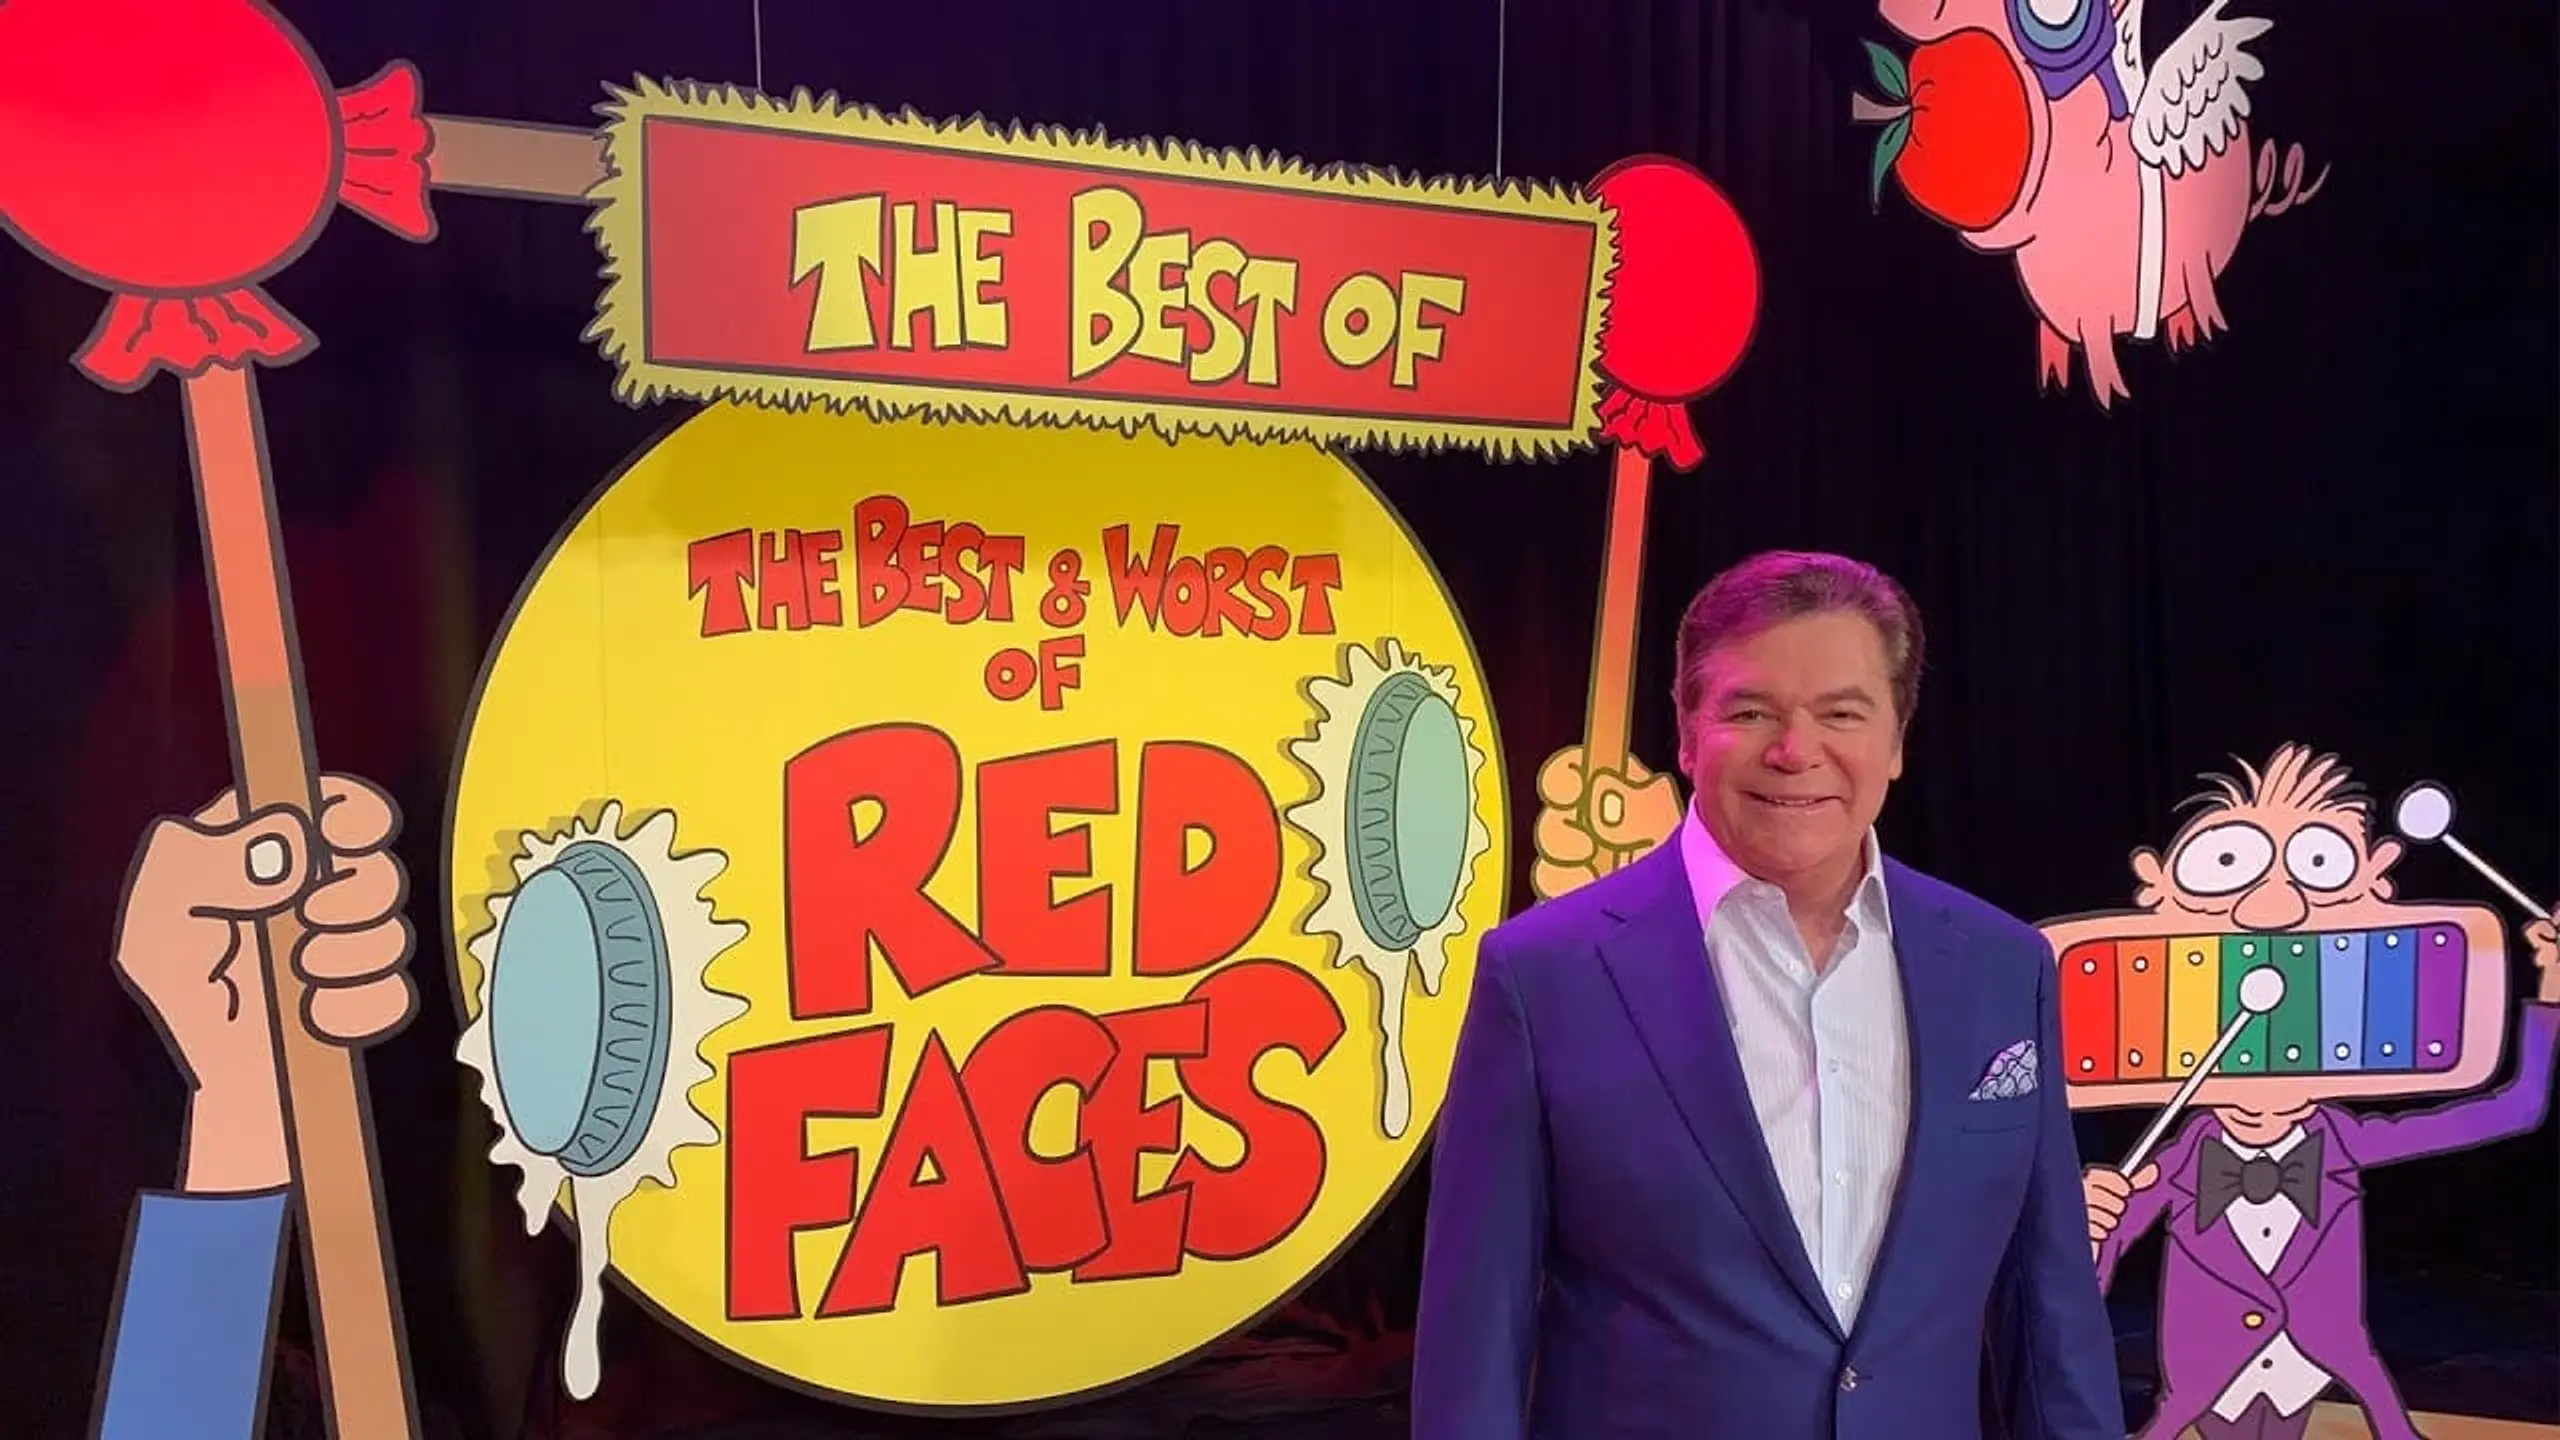 The Best of the Best and Worst of Red Faces